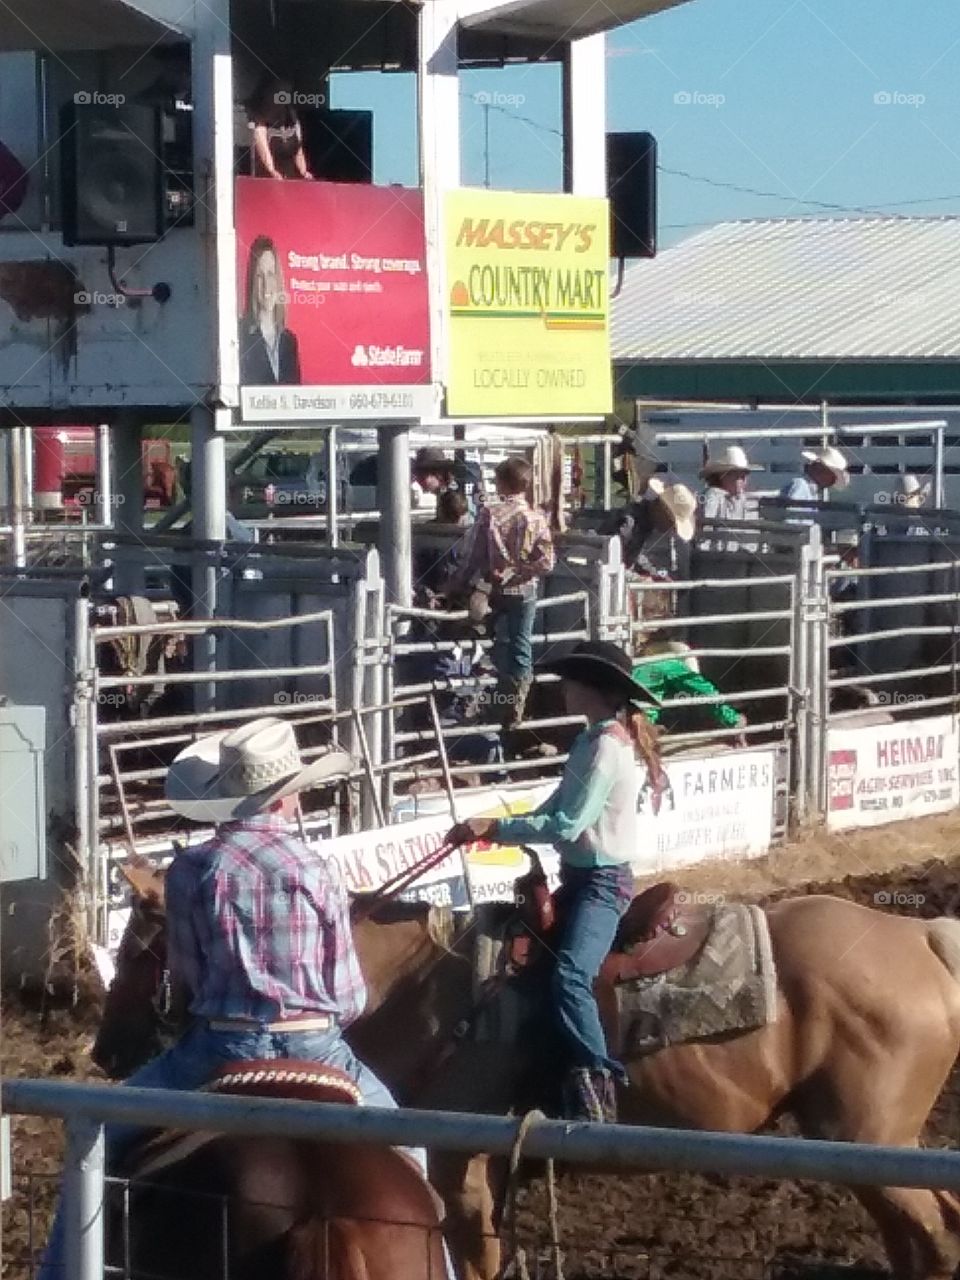 rodeo event